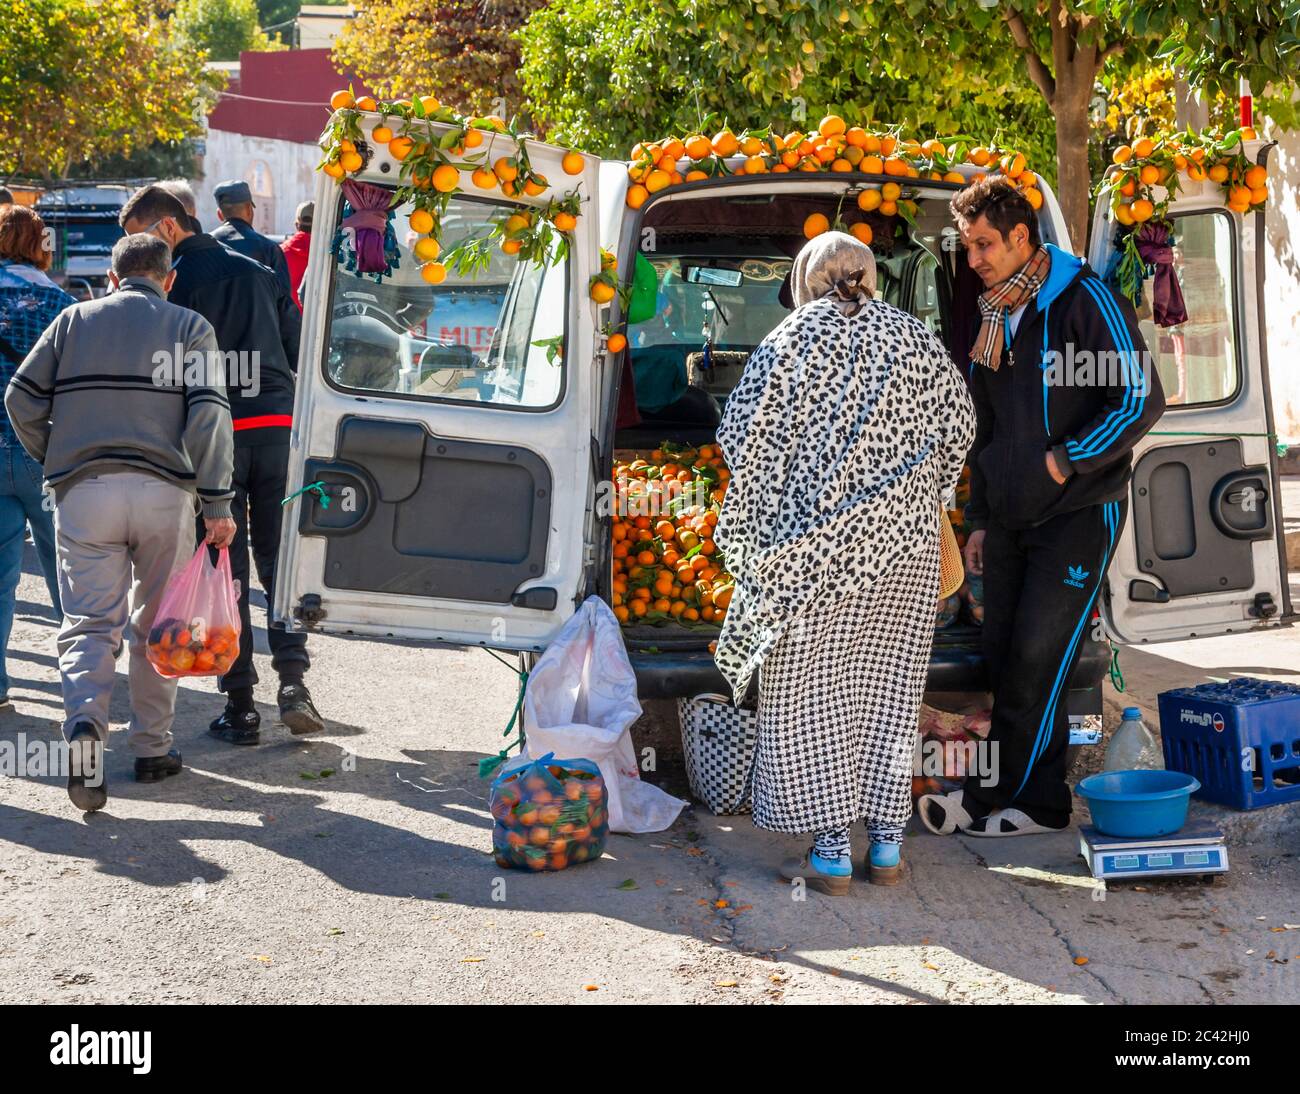 Impressions of Morocco: Vending cart decorated with oranges Stock Photo